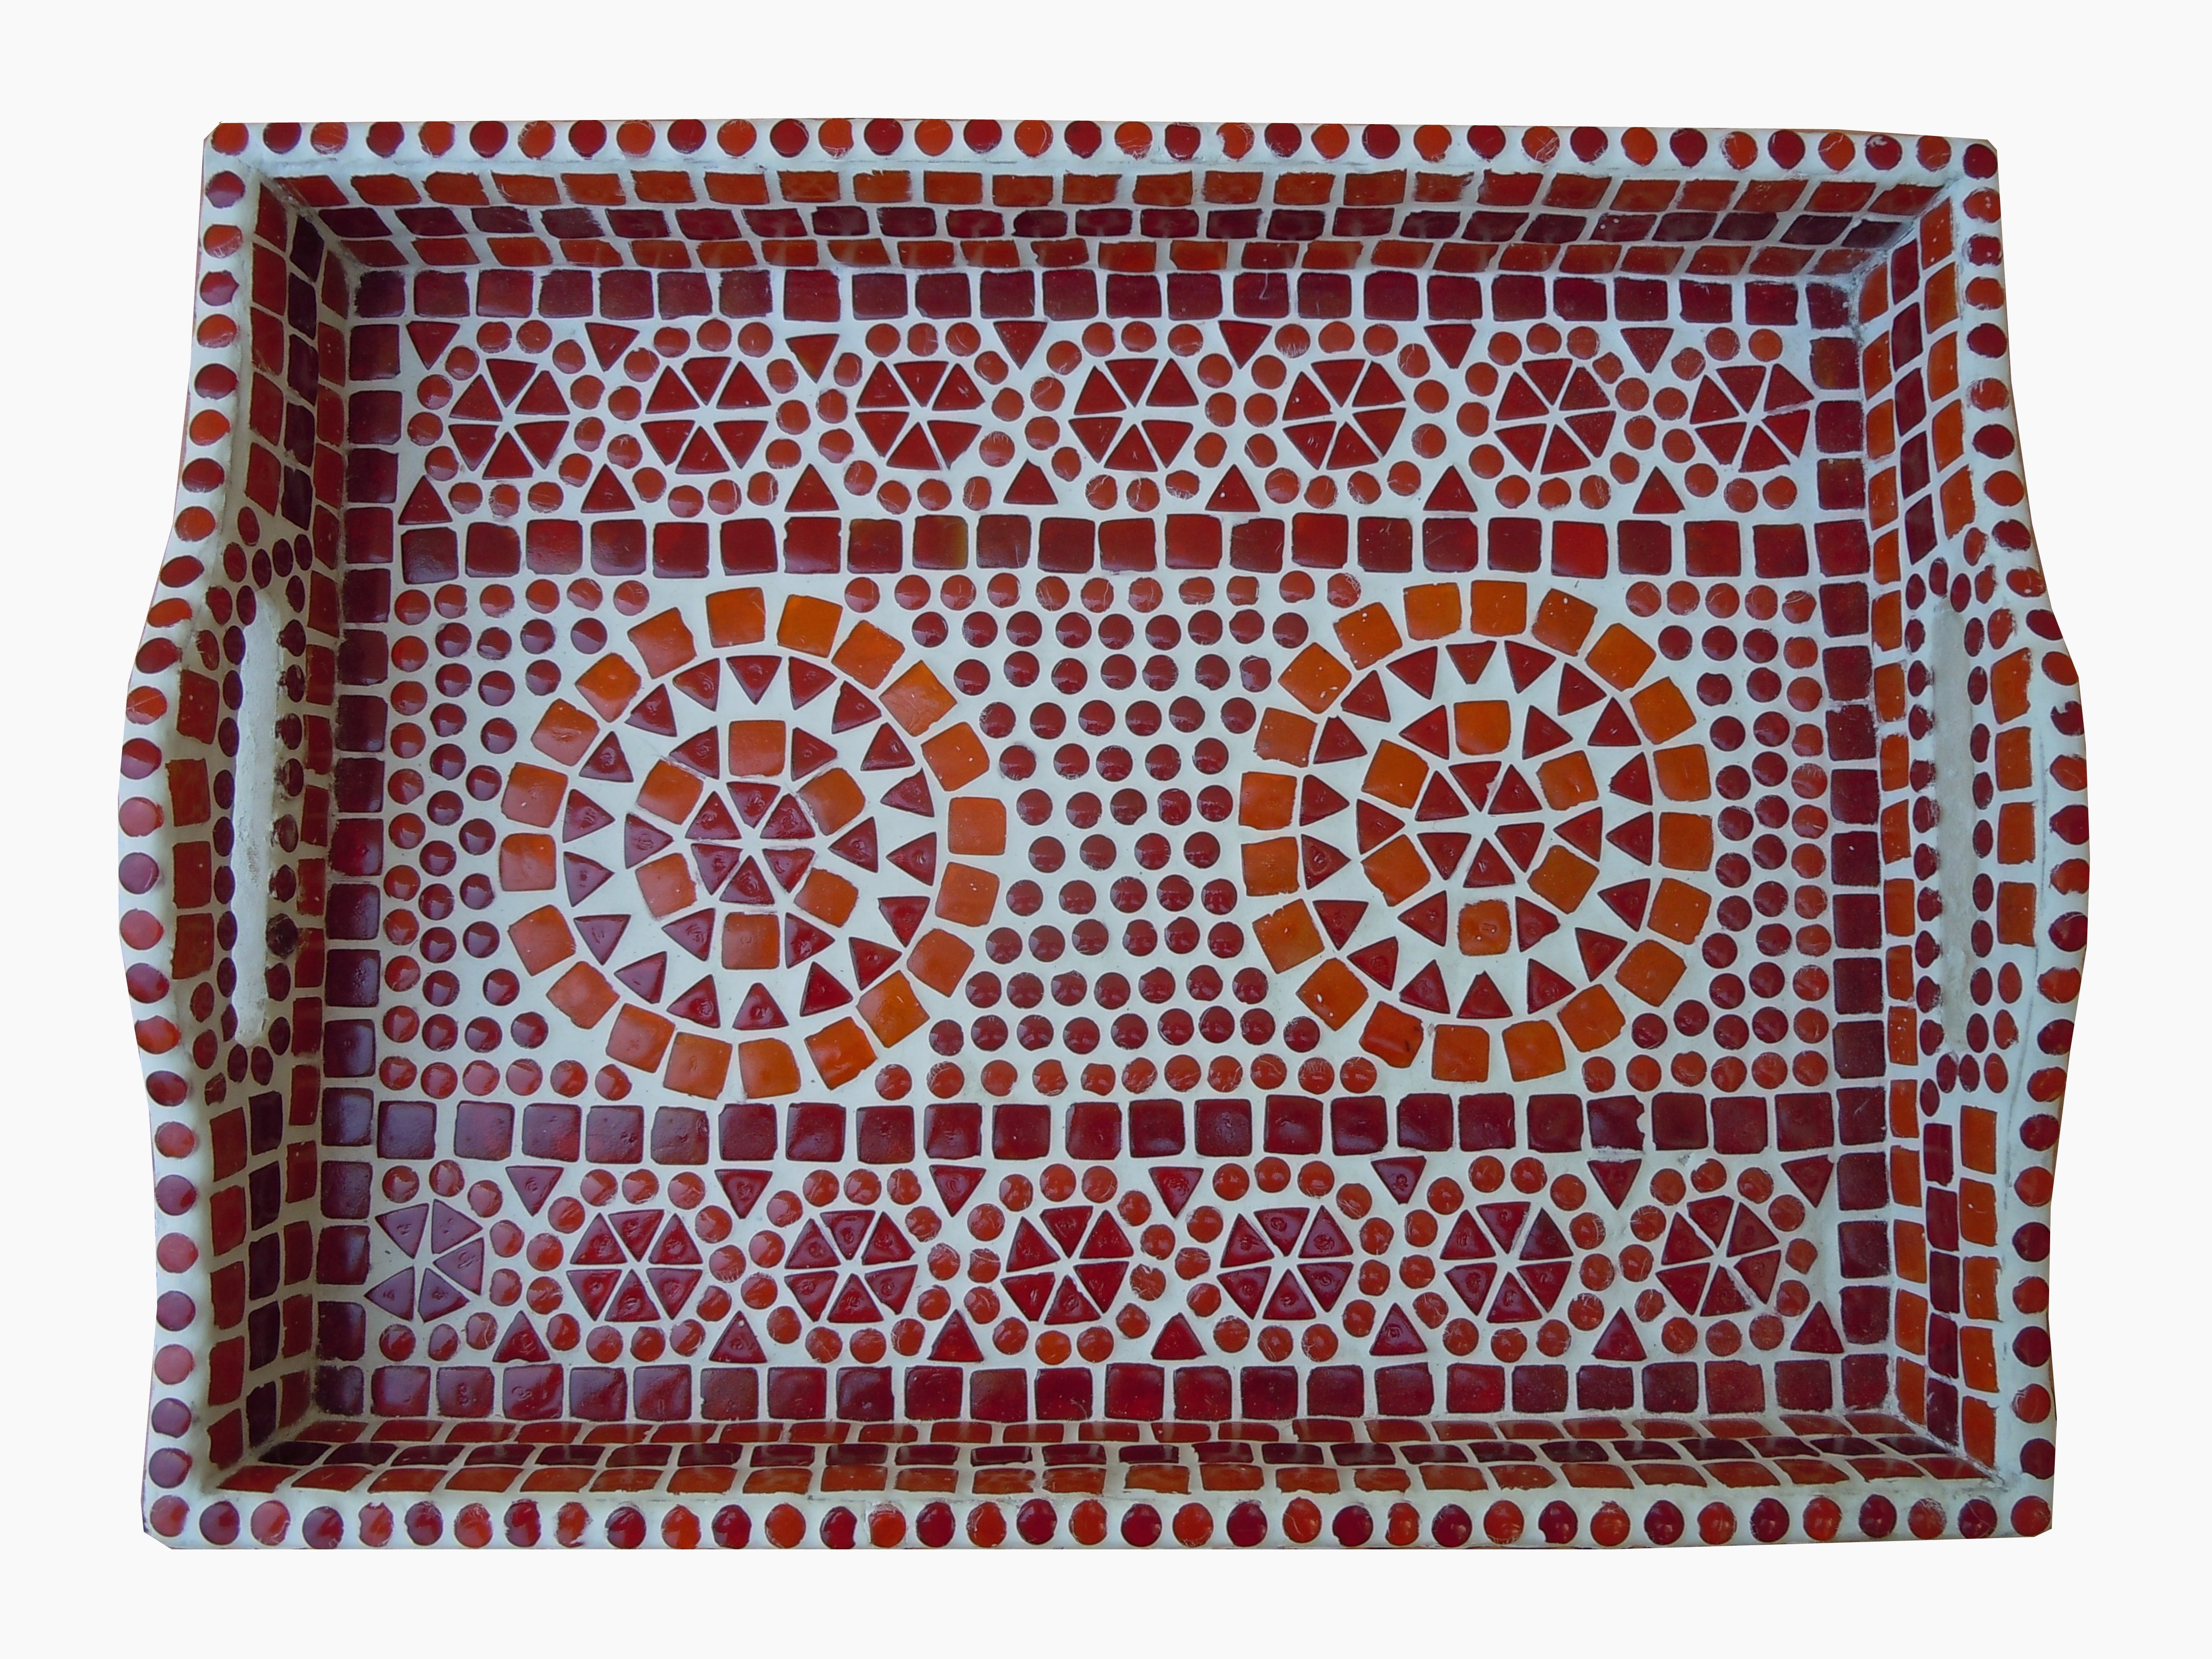 Serving Tray : Red Mosaic Art